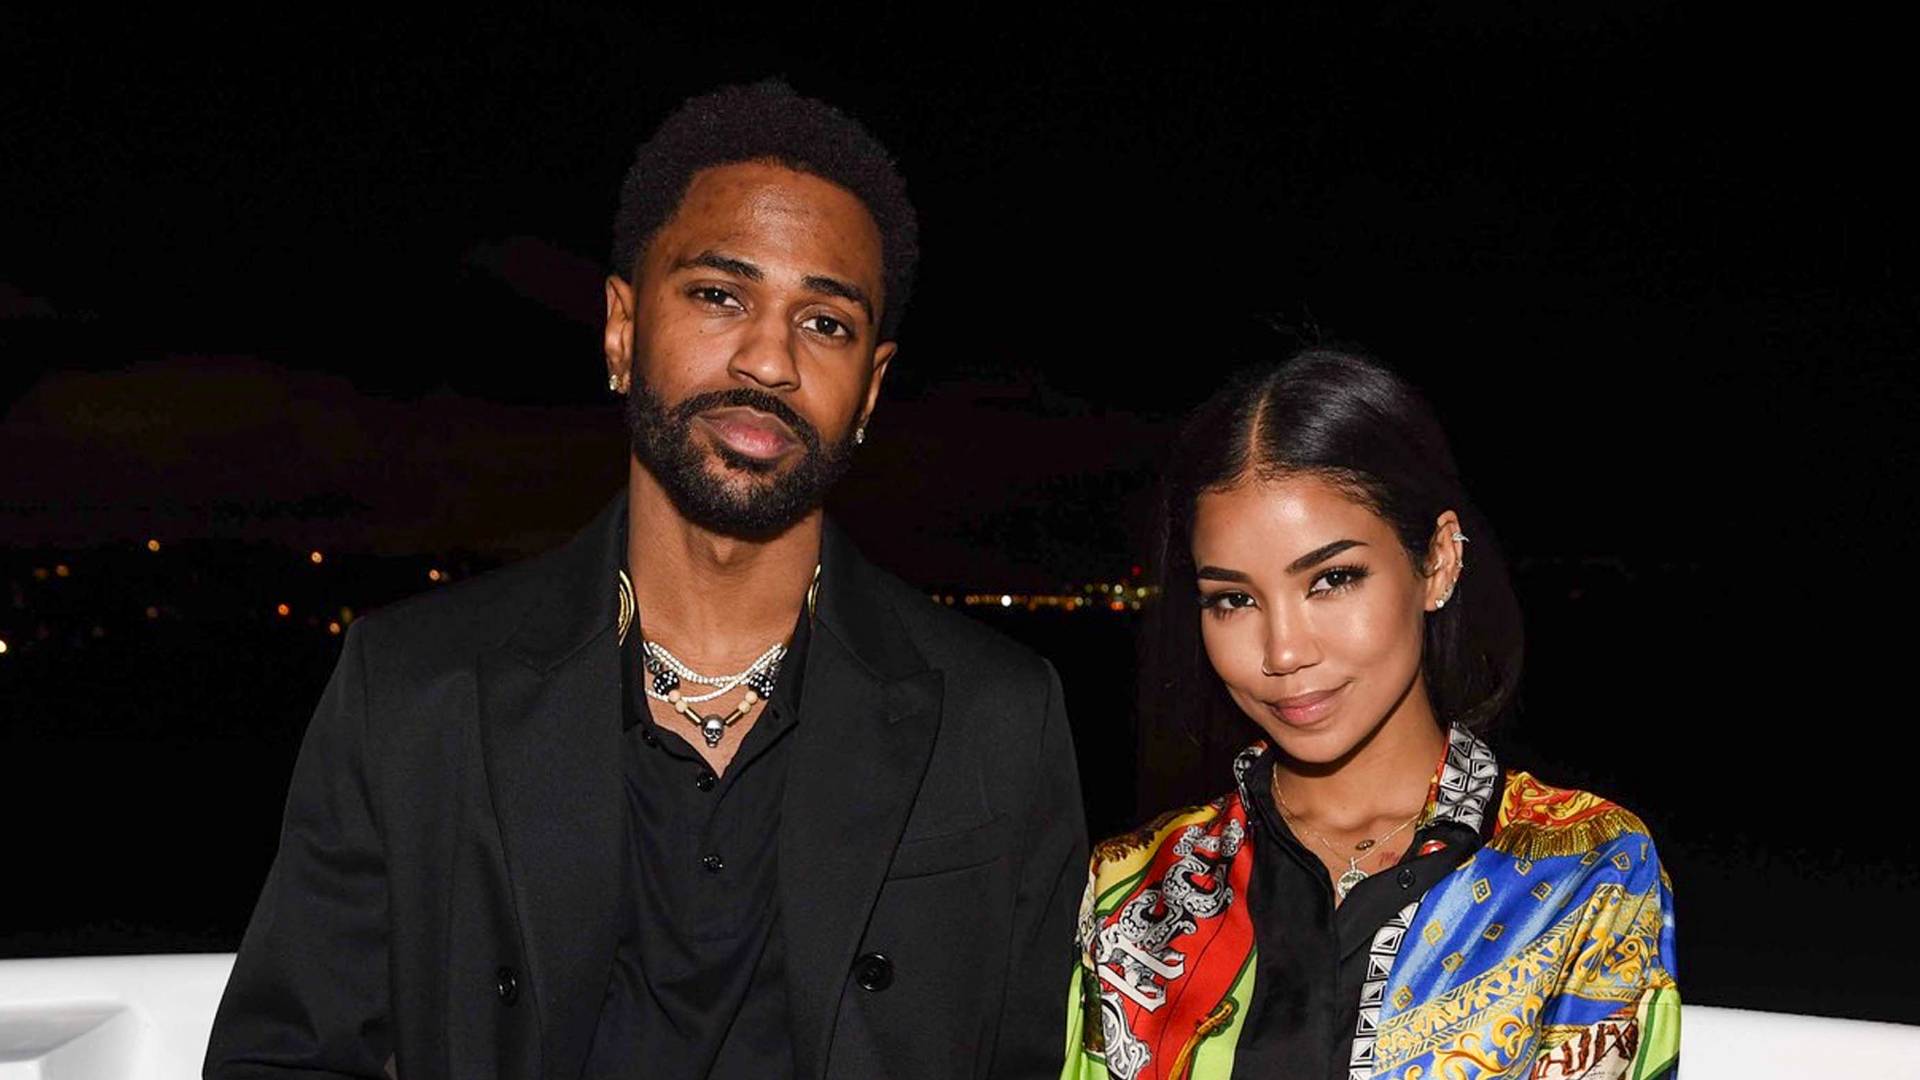 Big Sean (L) and Jhene Aiko (R) attend Jhene Aiko Surprise 30th Birthday Yacht Party on March 16, 2018 in Marina del Rey, California. 